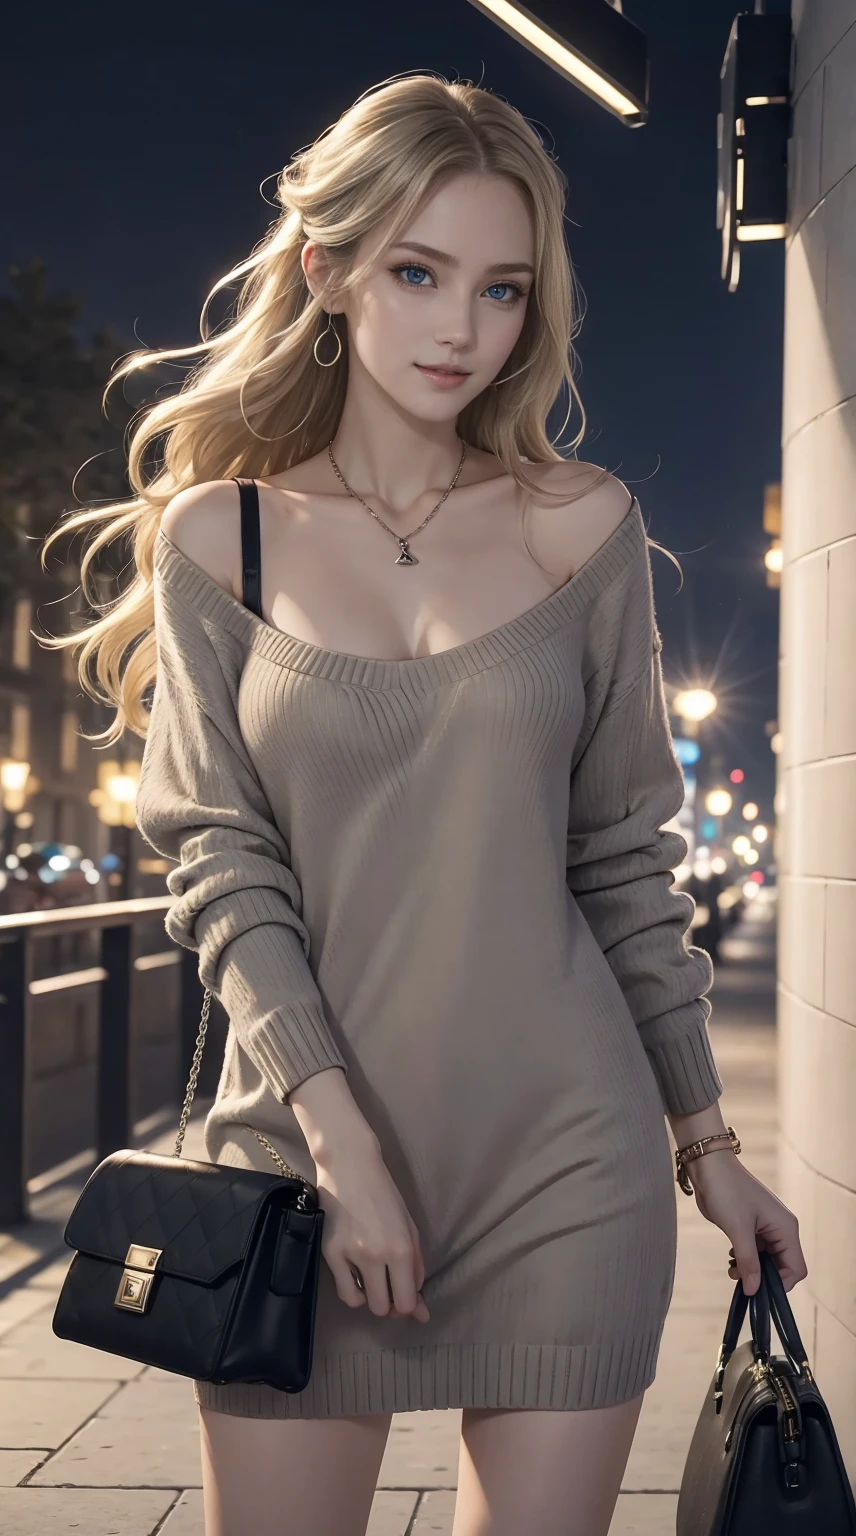 25-year-old Caucasian woman、ash blonde、blue eyess、Semi-long、setting hair、Hair is up、My hair is wavy、Slender but thin macho、accessories on the wrist、wearing a chain necklace、Beautiful breasts、a smile、Wearing a sweater dress、Holding a handbag in his hand、I am in a landscape where I can see the street lights at night.、I need space above my head